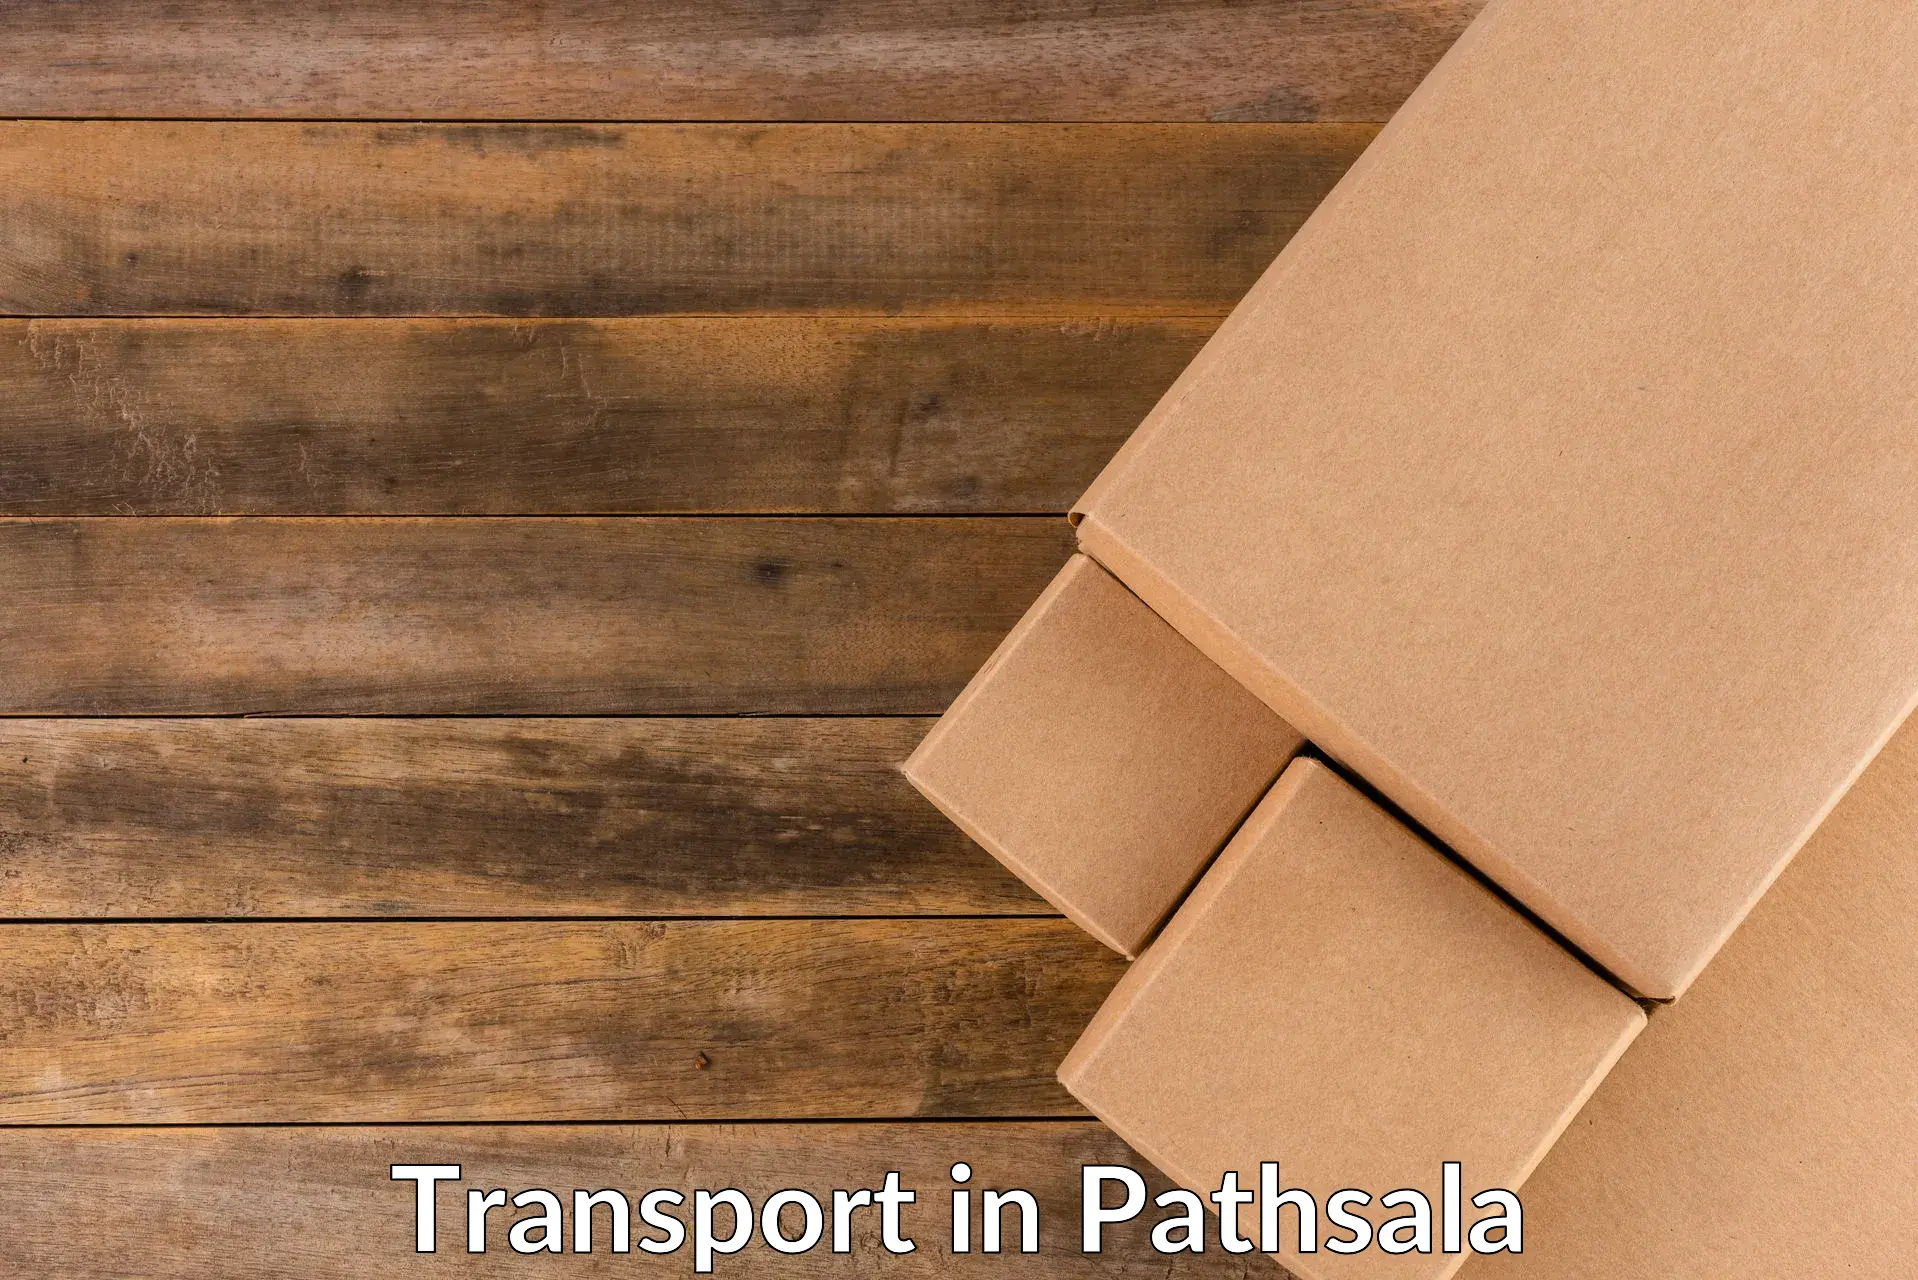 Express transport services in Pathsala